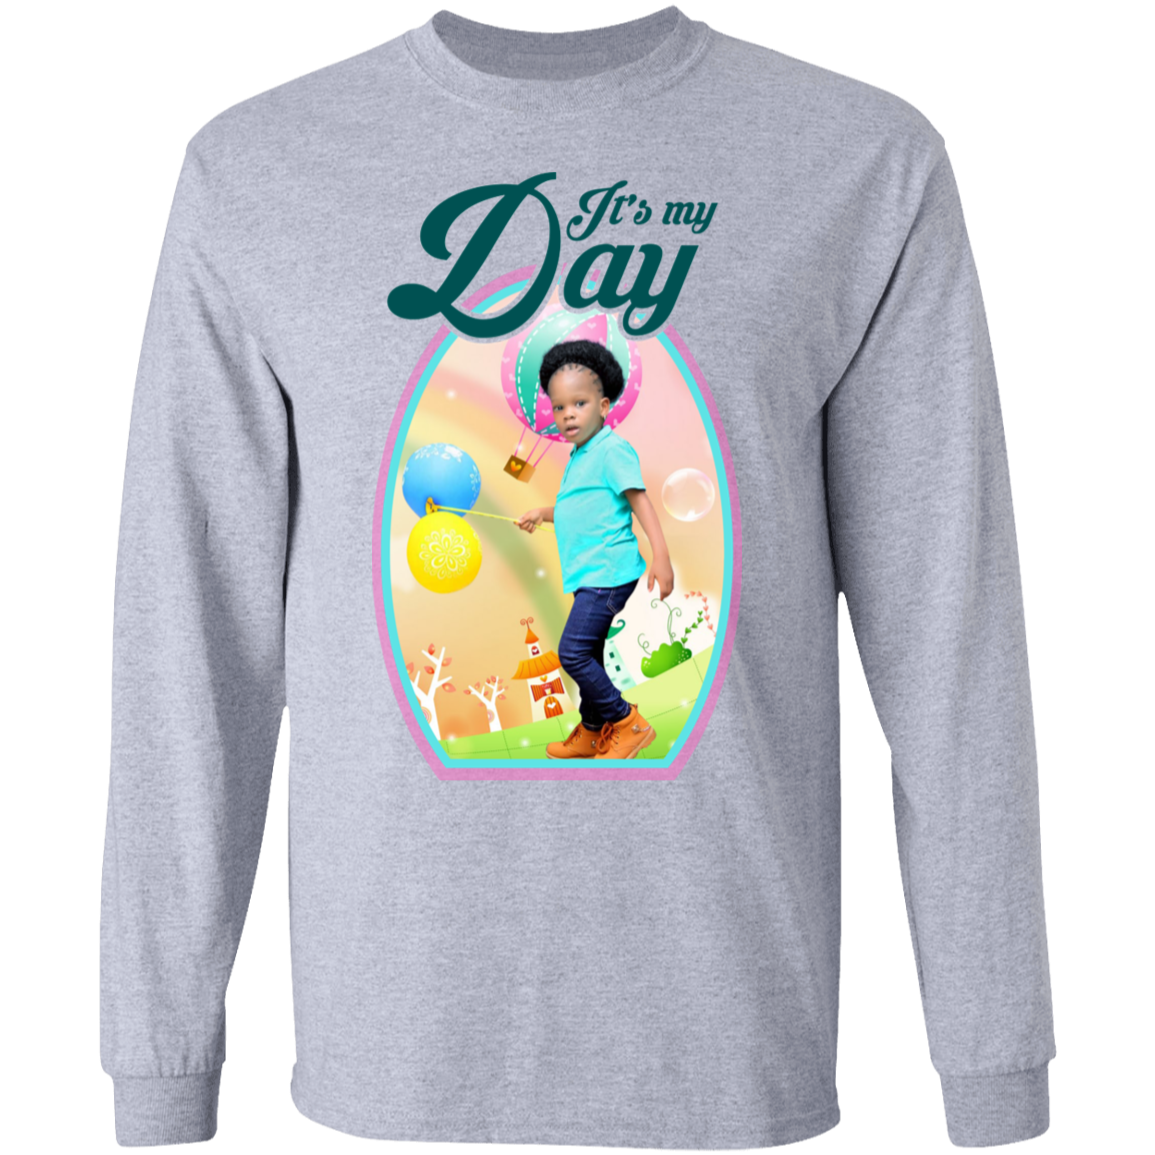 It's My Day LS T-Shirt